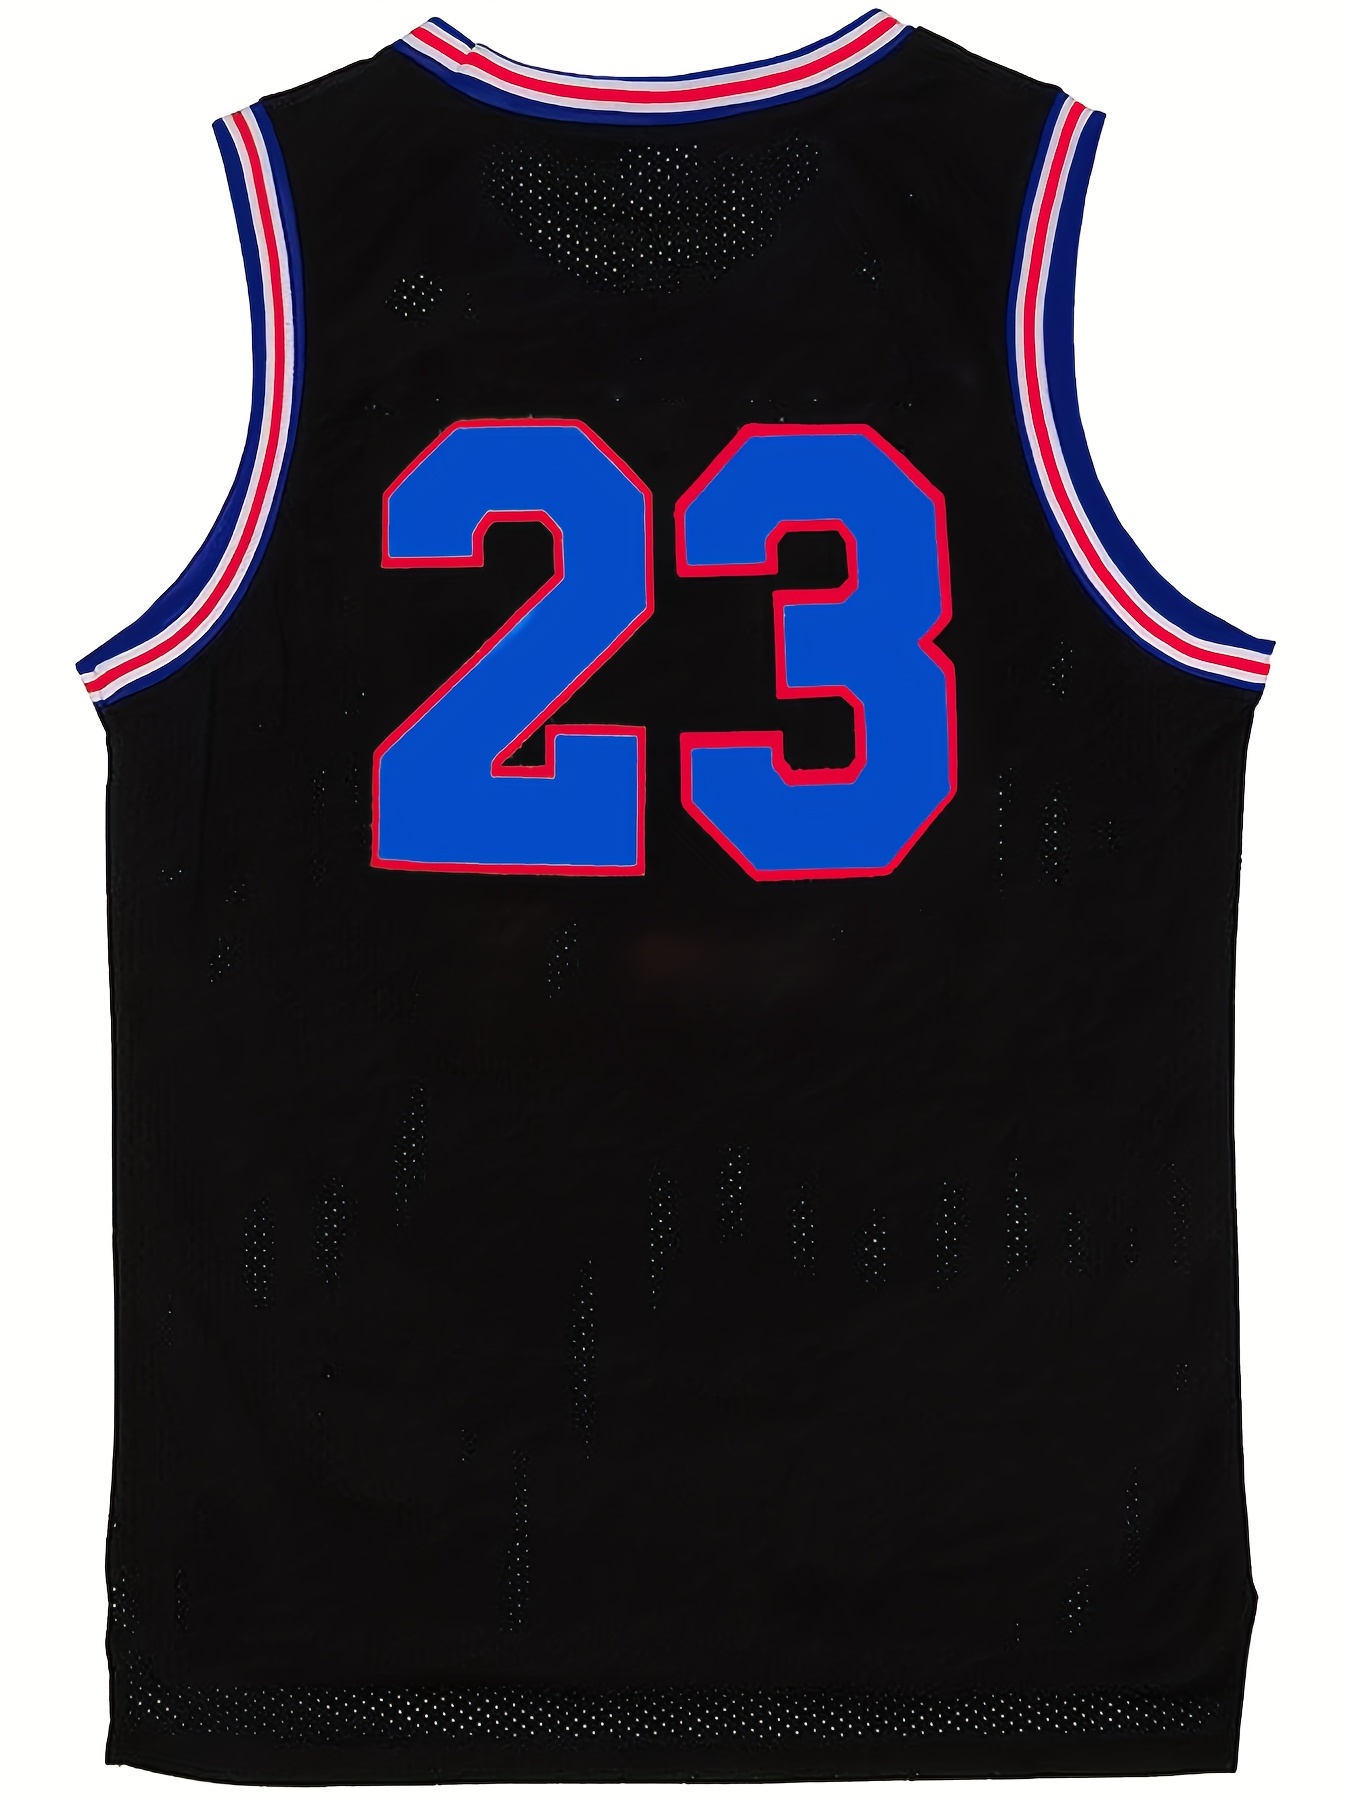  Basketball Jersey Shirt for Boys Youth : #23 Hip-Hop 90s Retro  Classic Embroidered Youth Basketball Sports Jersey Breathable. (as1, Alpha,  x_s, Regular, Black) : Sports & Outdoors